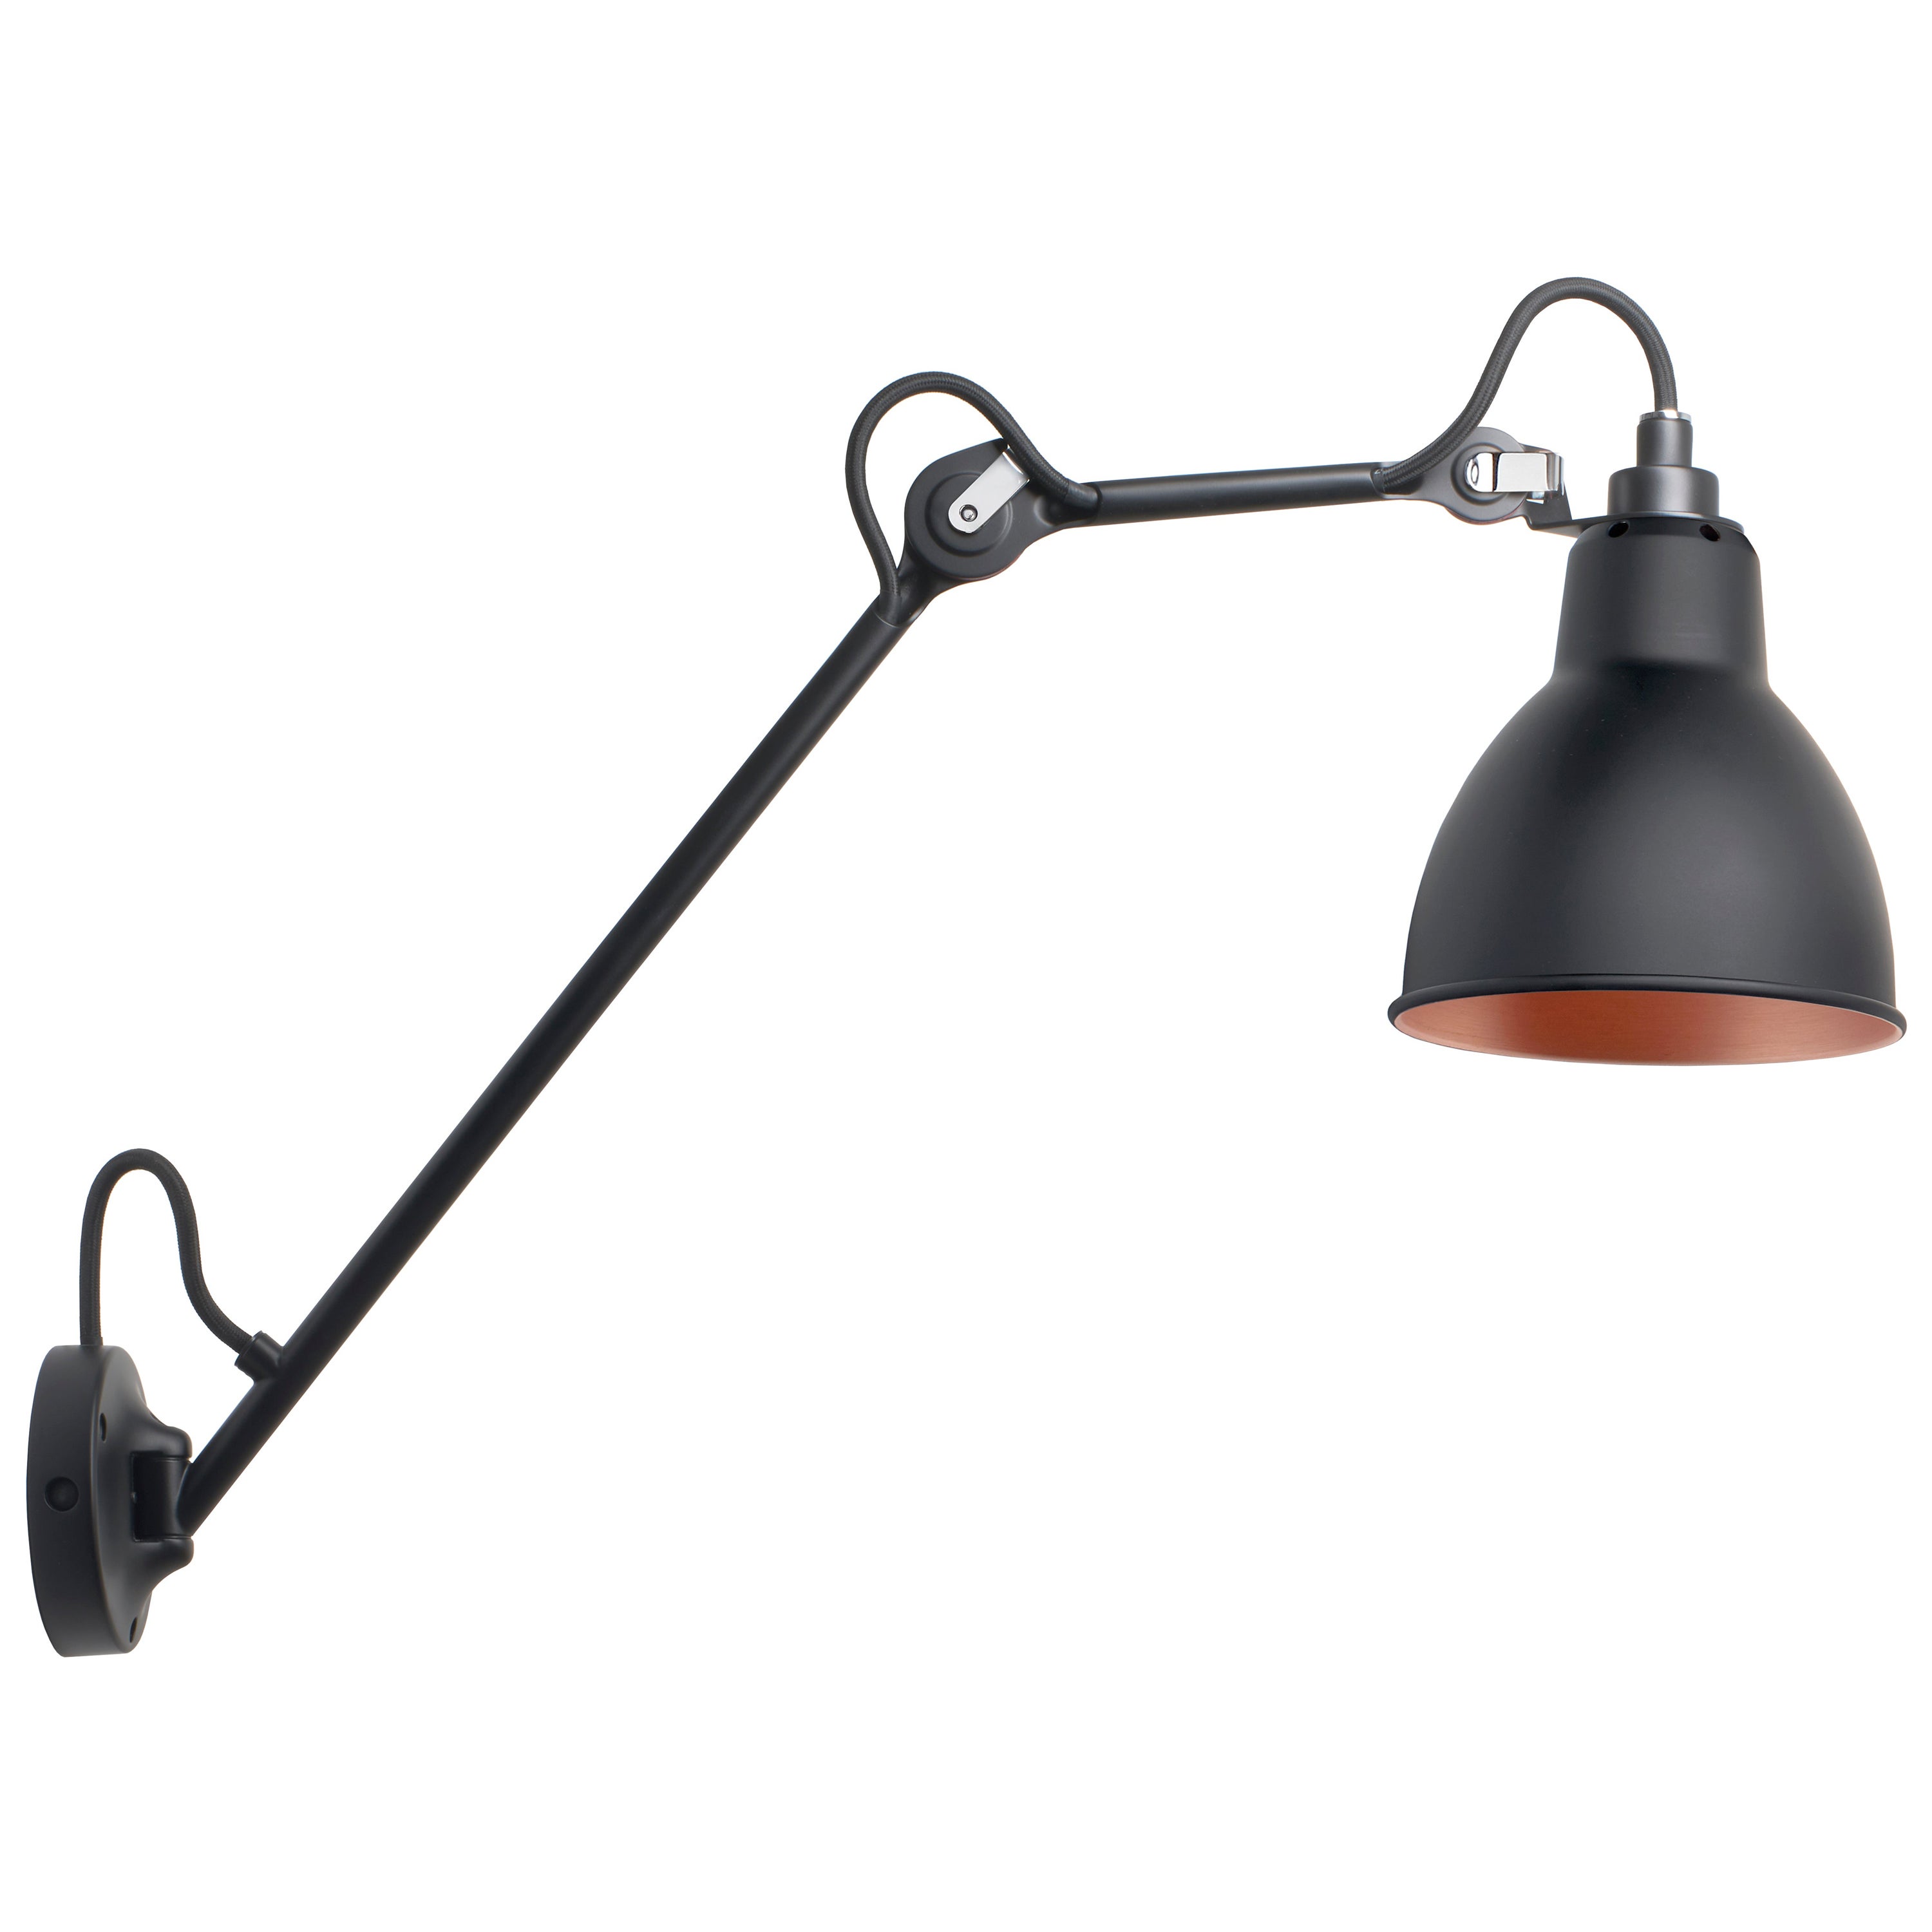 DCW Editions La Lampe Gras N°122 Wall Lamp in Black Arm and Black Copper Shade For Sale